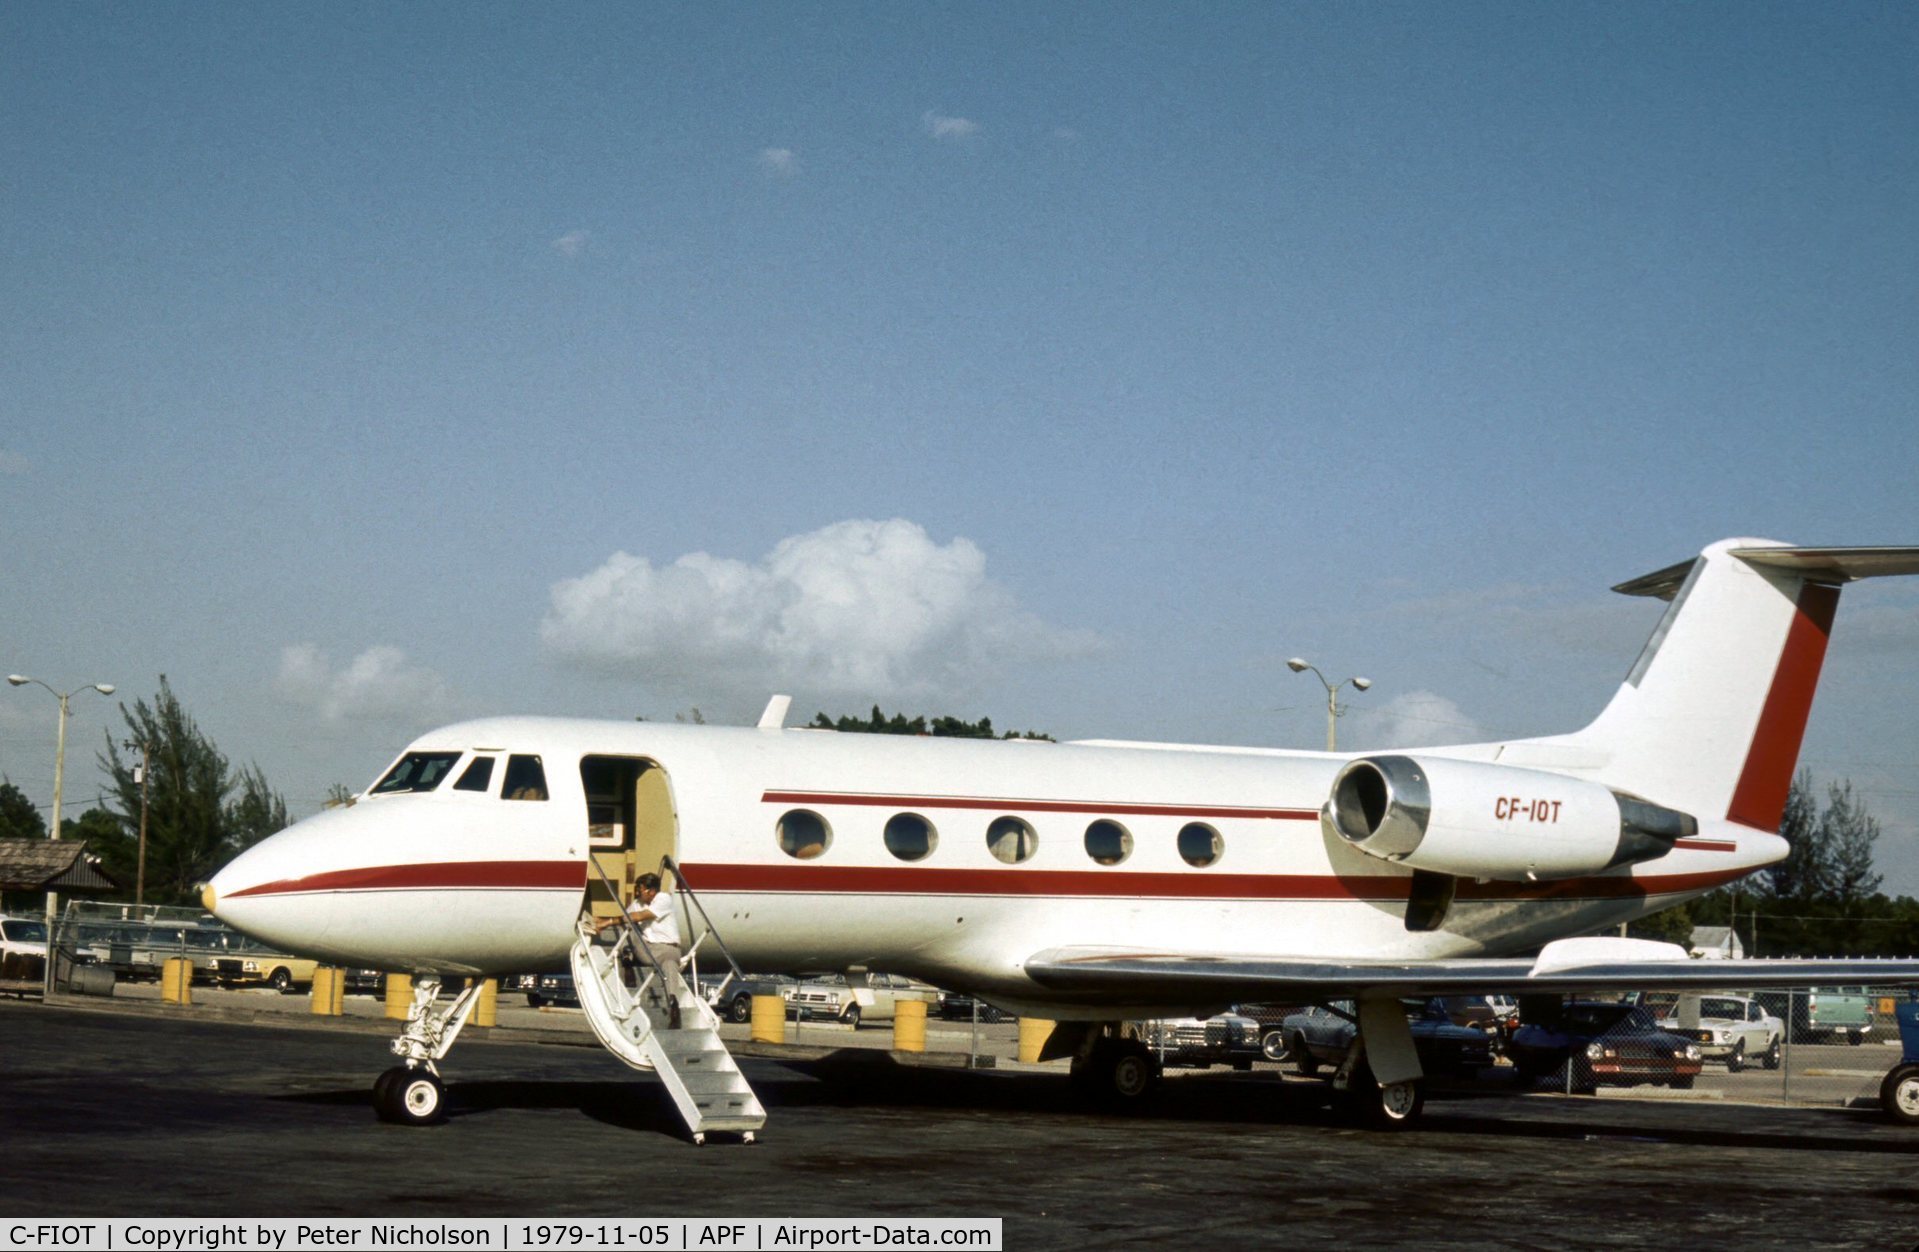 C-FIOT, 1969 Grumman G-1159 Gulfstream II C/N 052, As CF-IOT this Gulfstream II of Imperial Oil Limited was seen at Naples in November 1979.